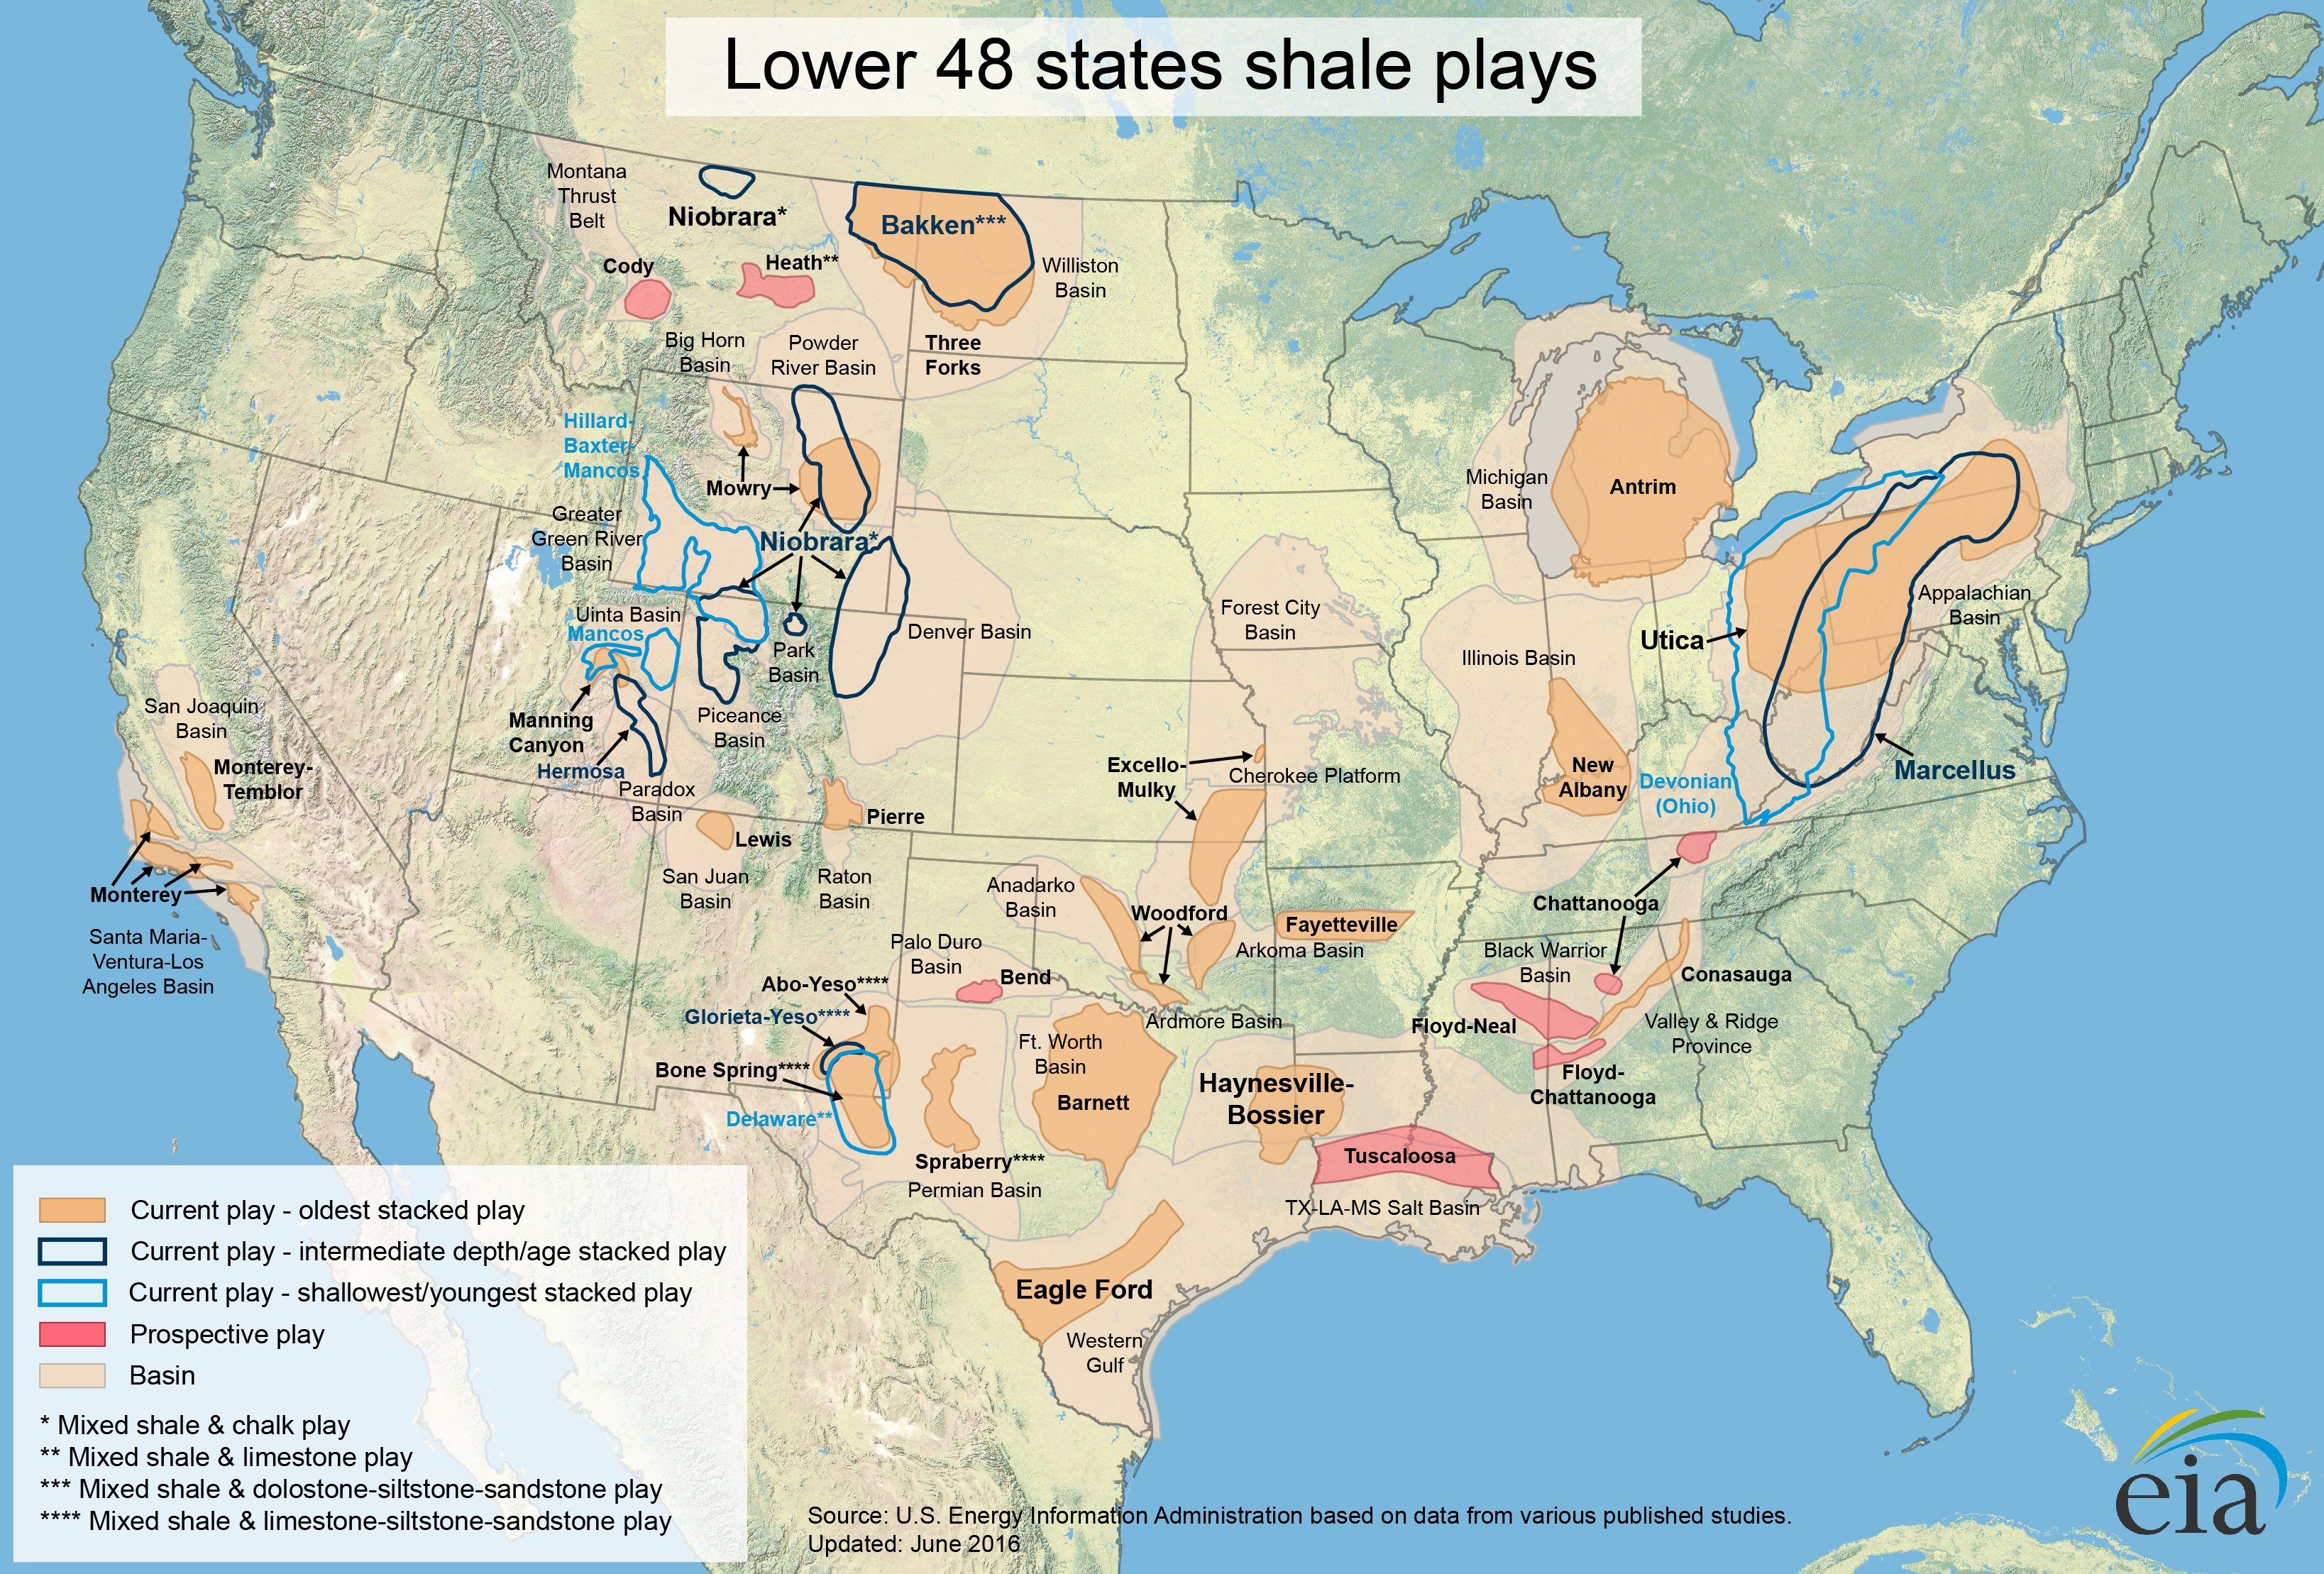 shale_gas_lower48